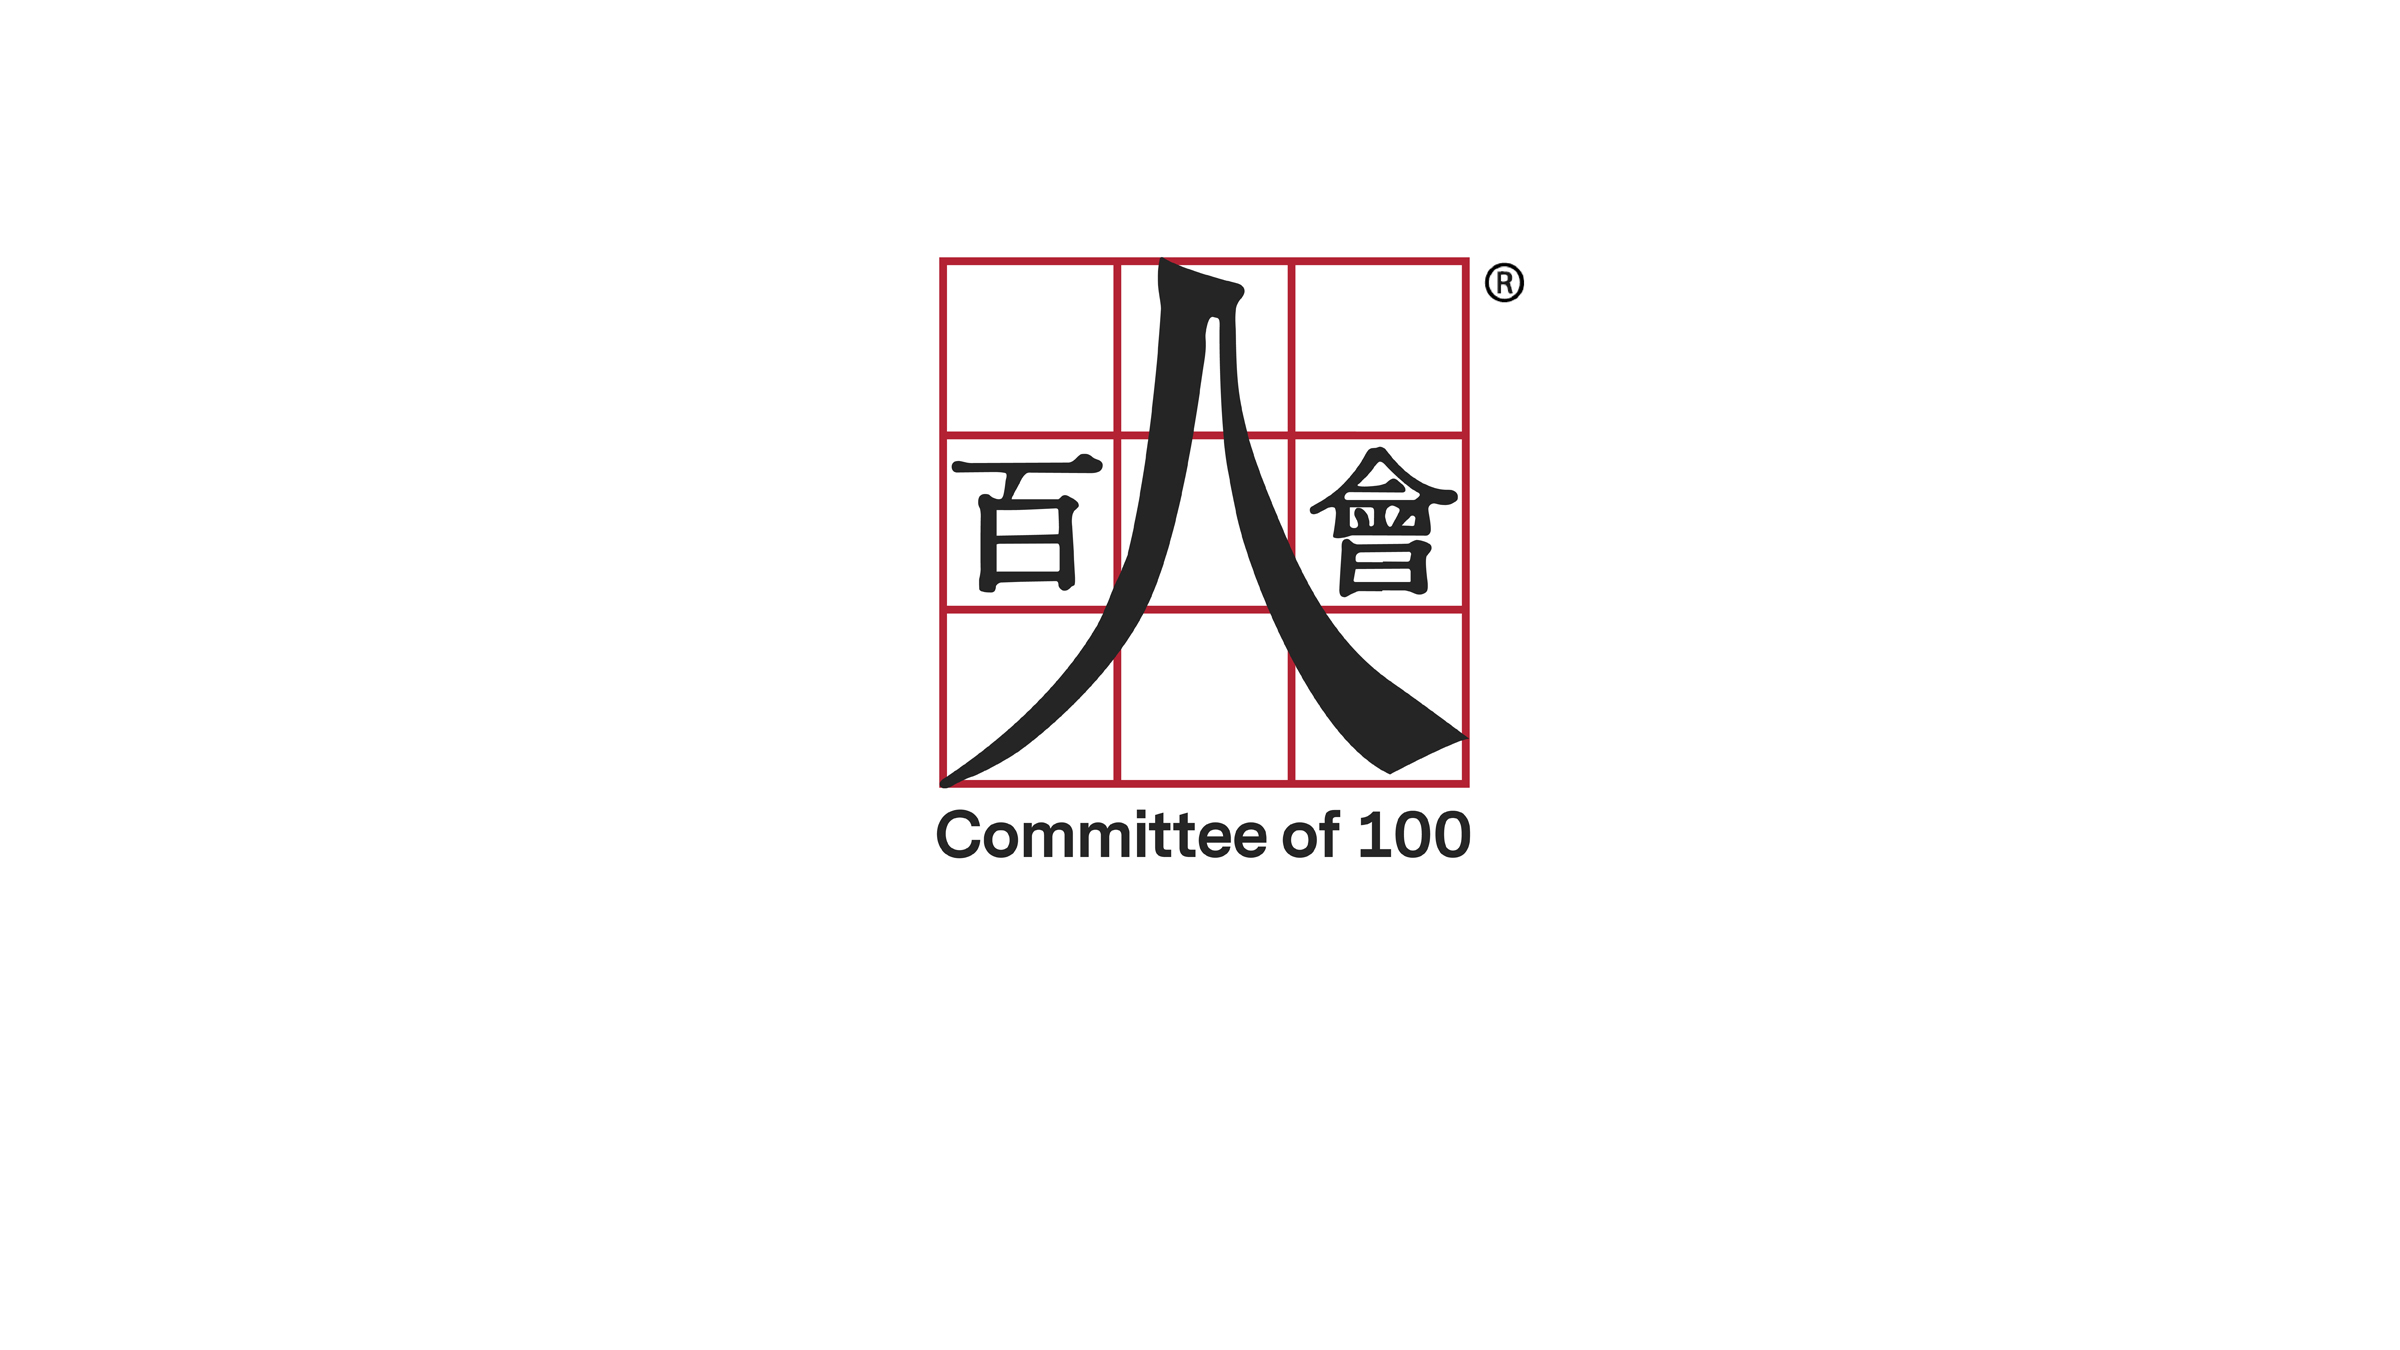 Statement from Committee of 100 on the Increasing Hate Crimes Directed at Chinese and Asian Americans